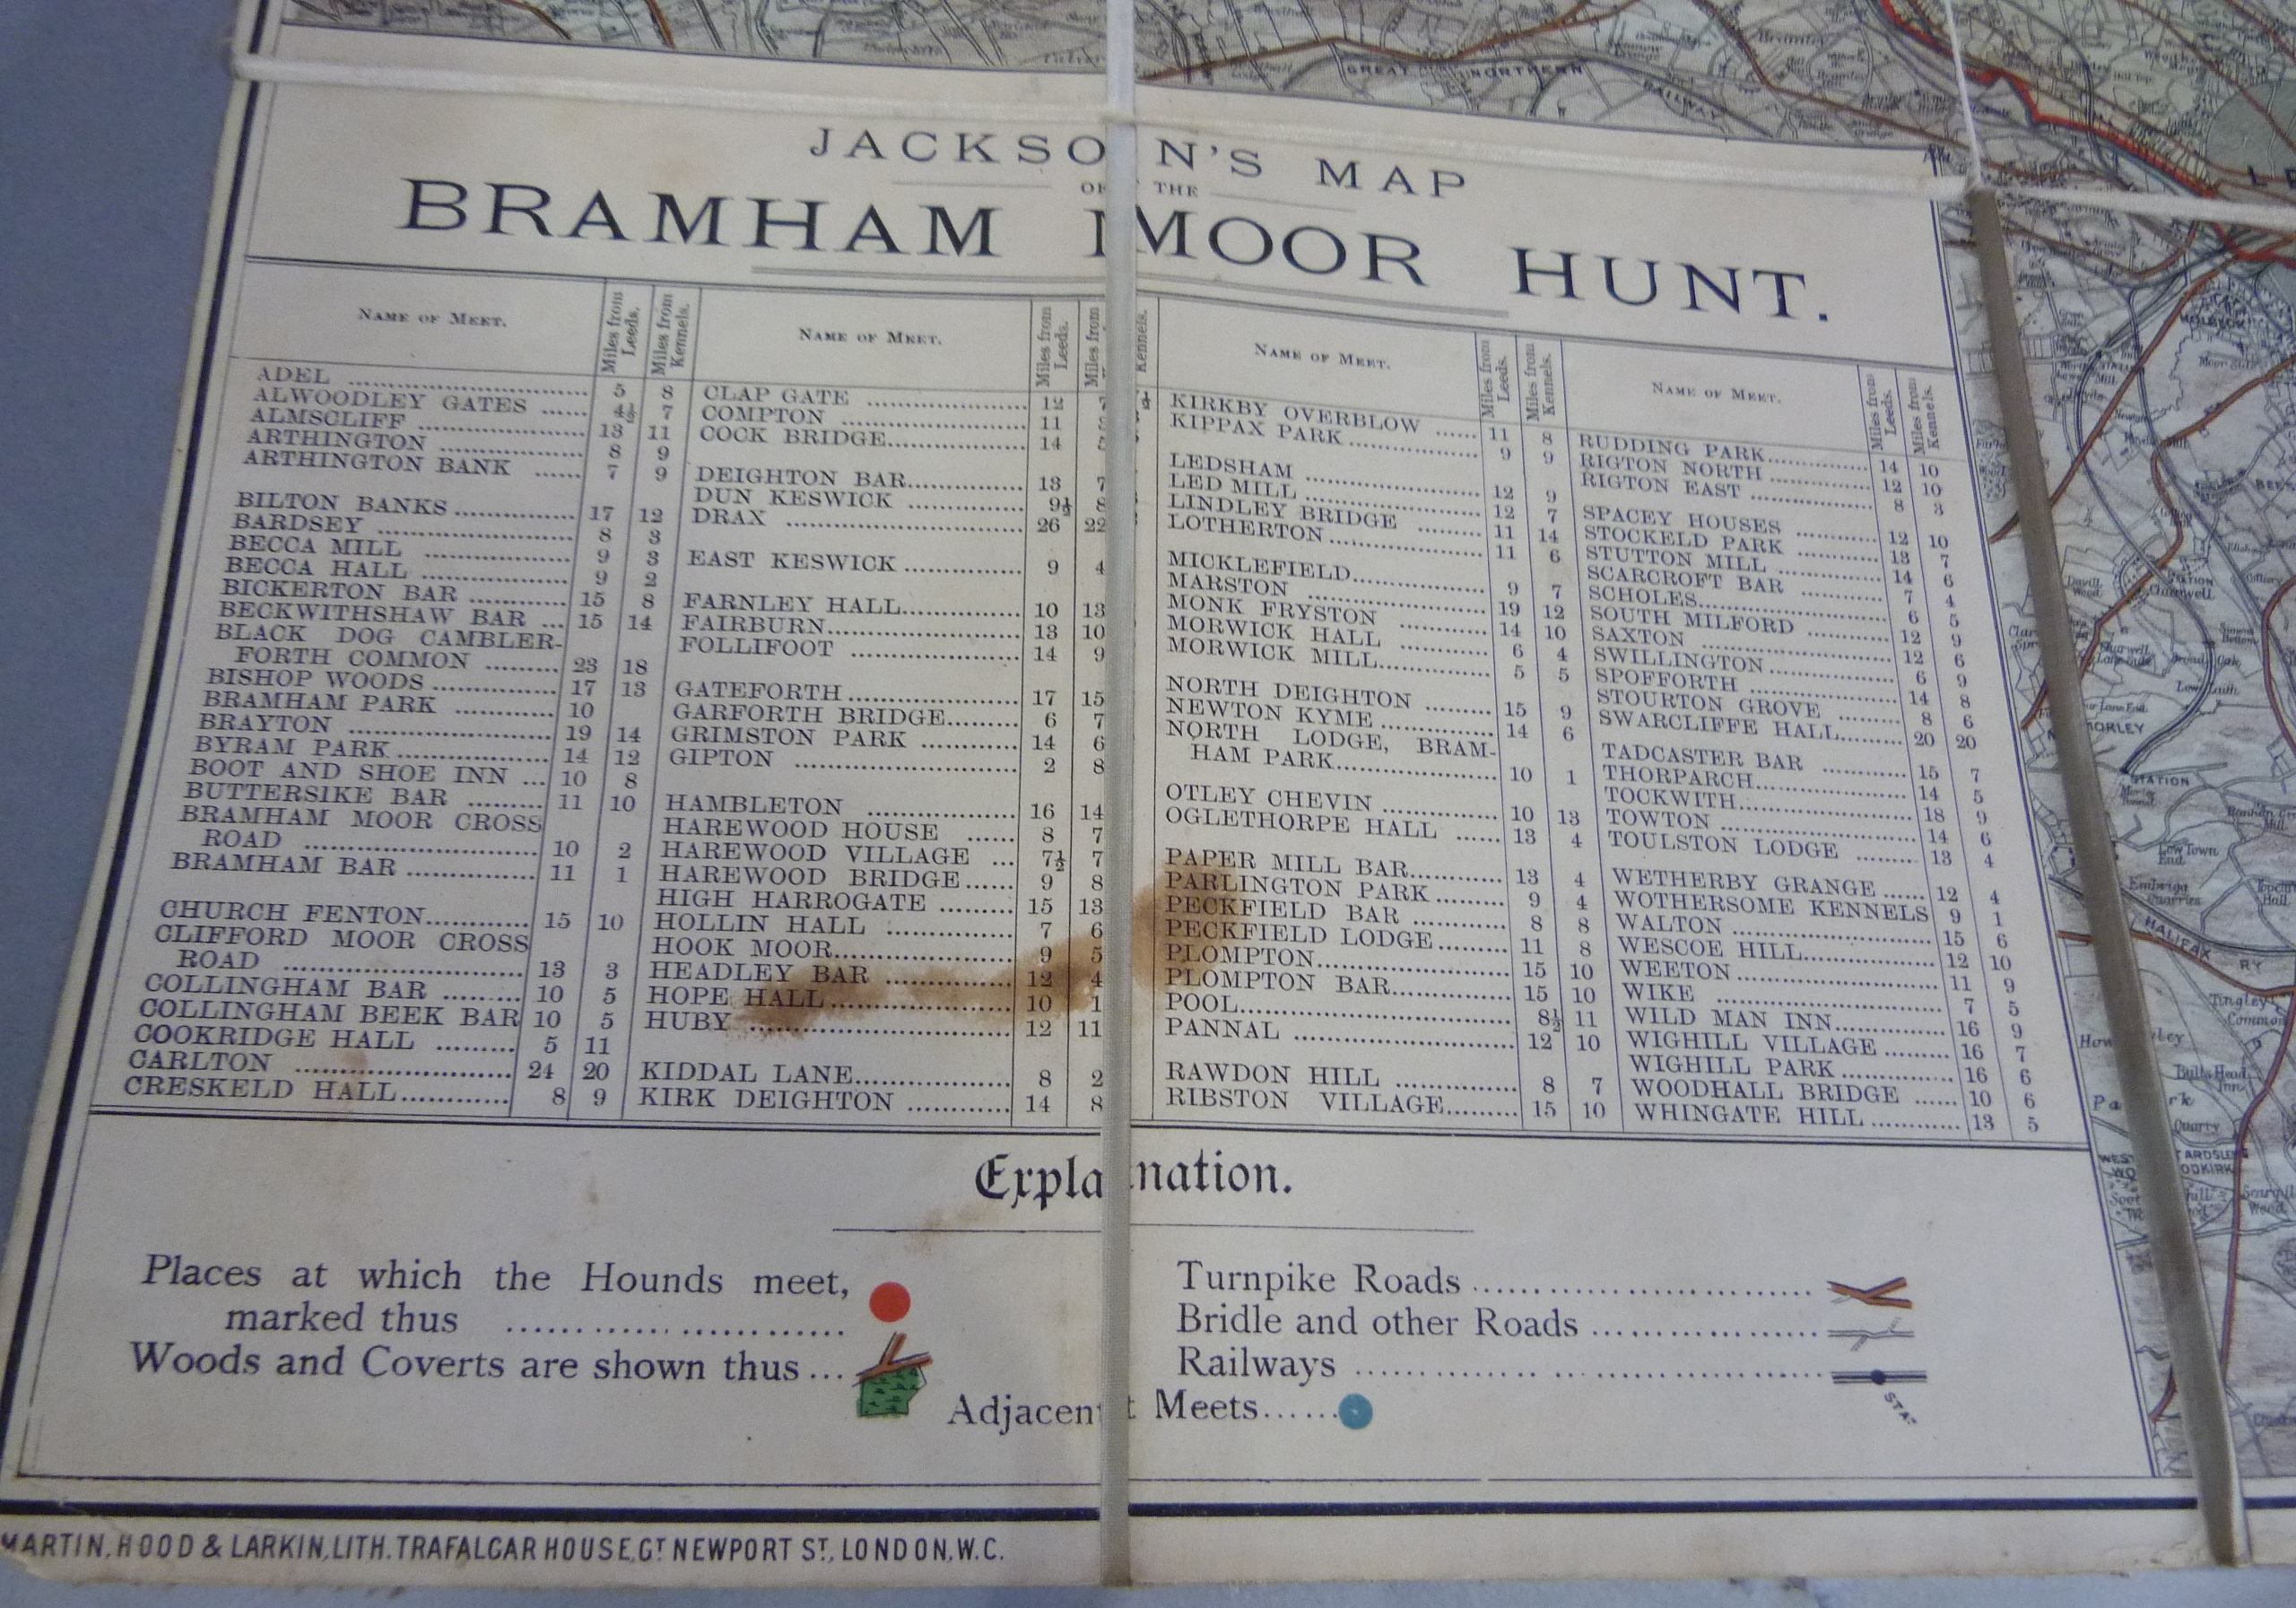 Jackson' Map of The Bramham Moor Hunt and surrounding areas - Image 4 of 5